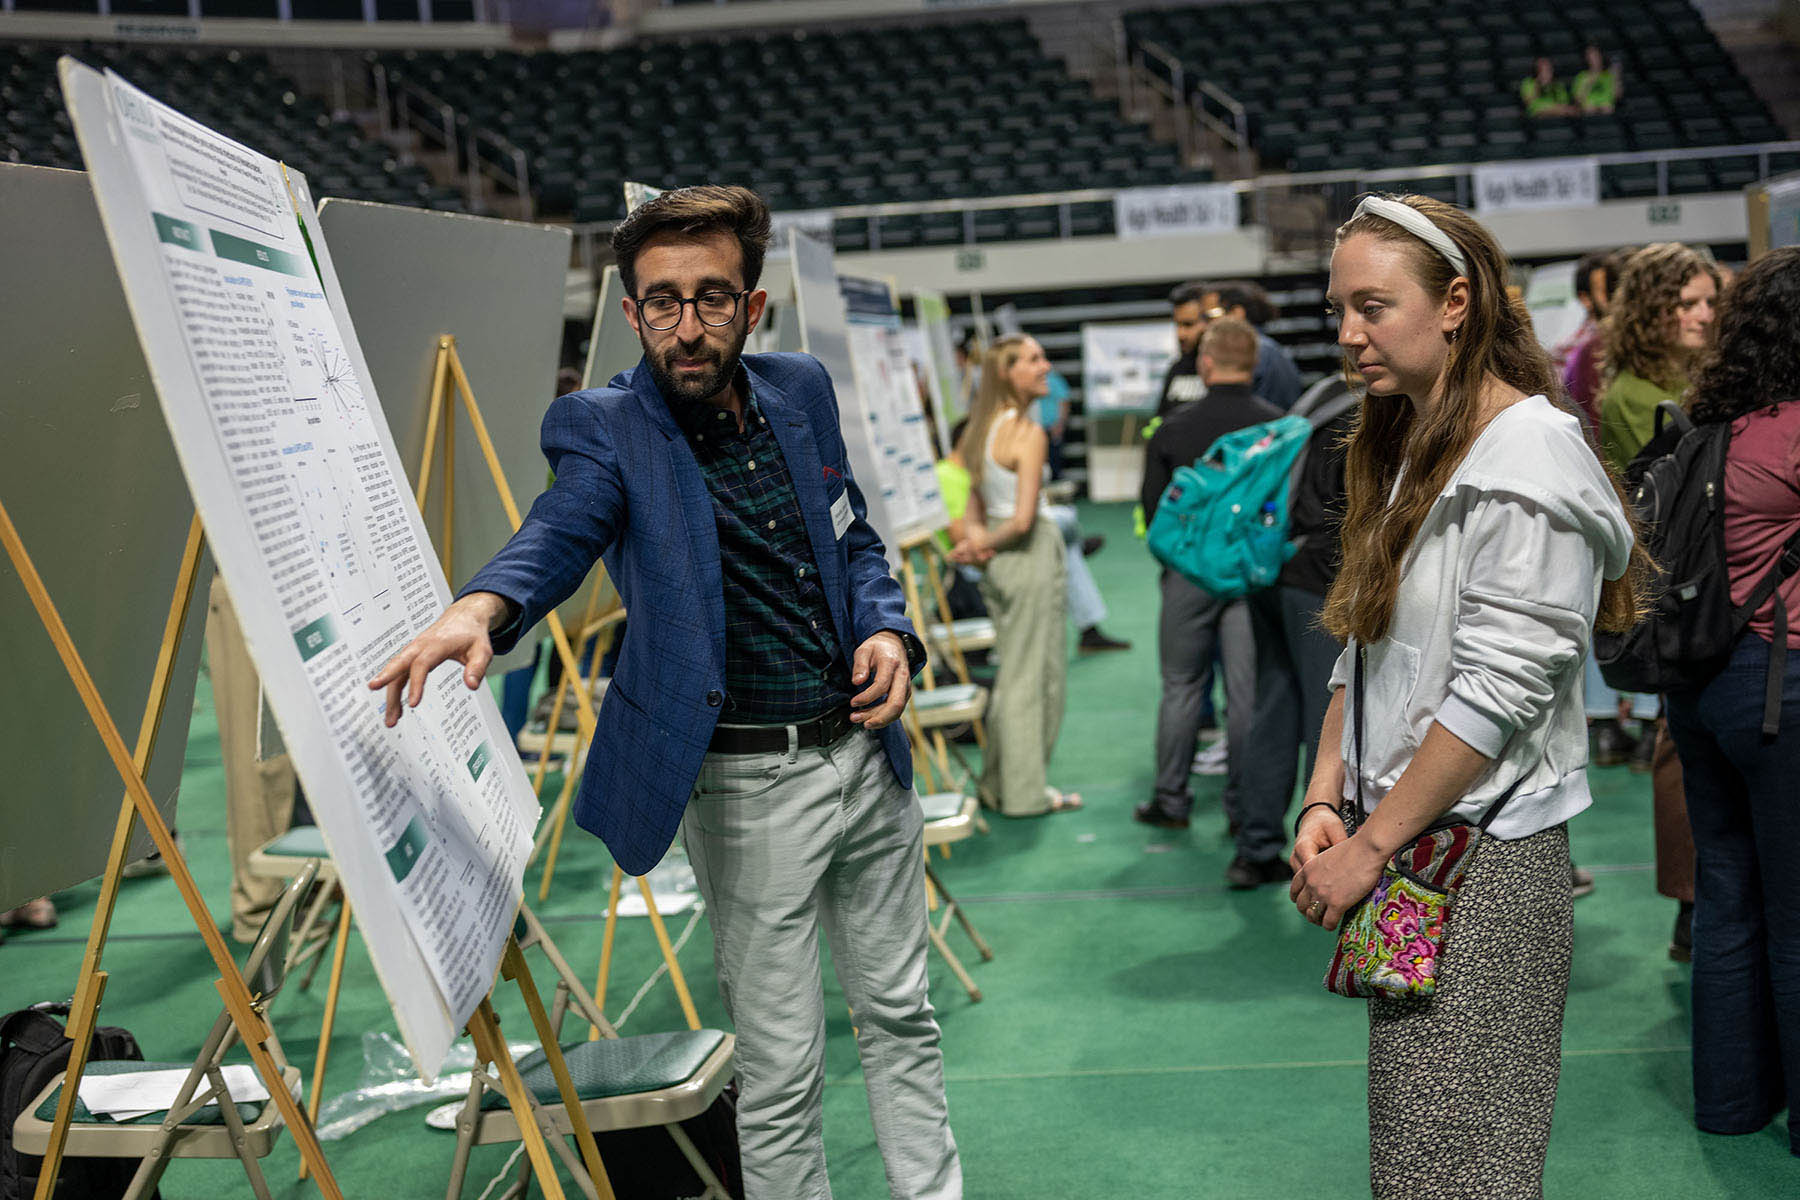 a student points to his research project display while another student looks on